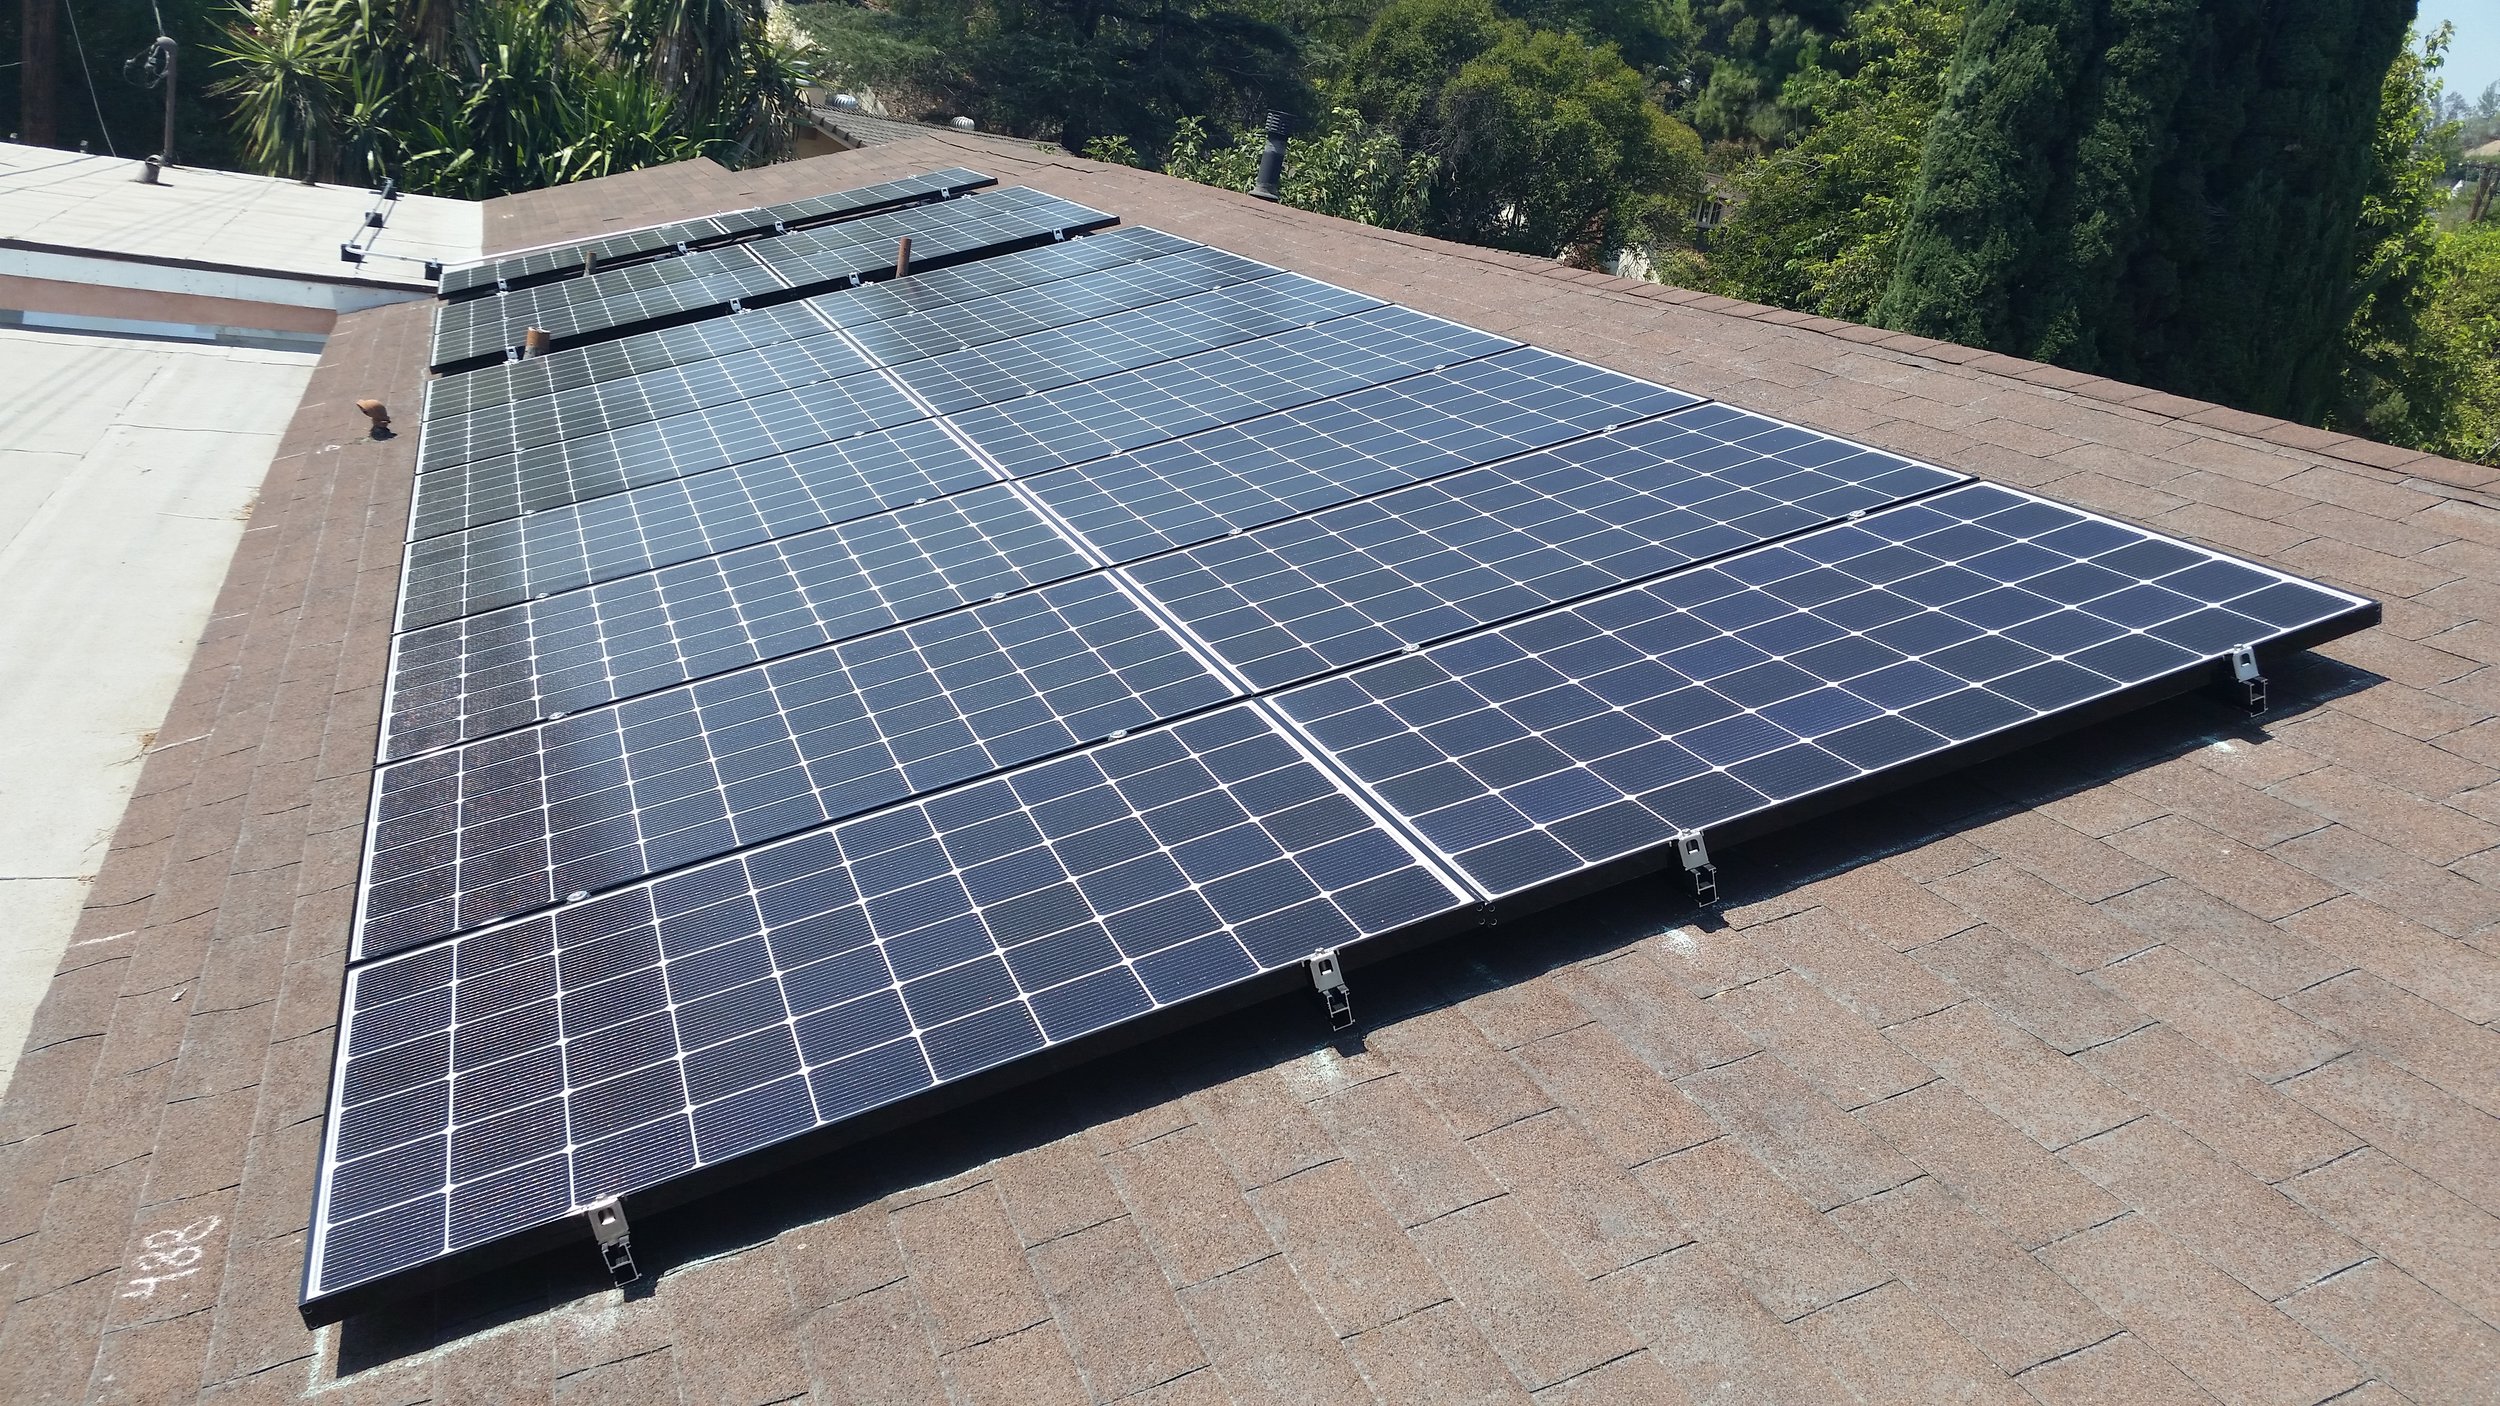 How to Find San Diego Solar Companies that Offer the Best Cost-Saving Deals